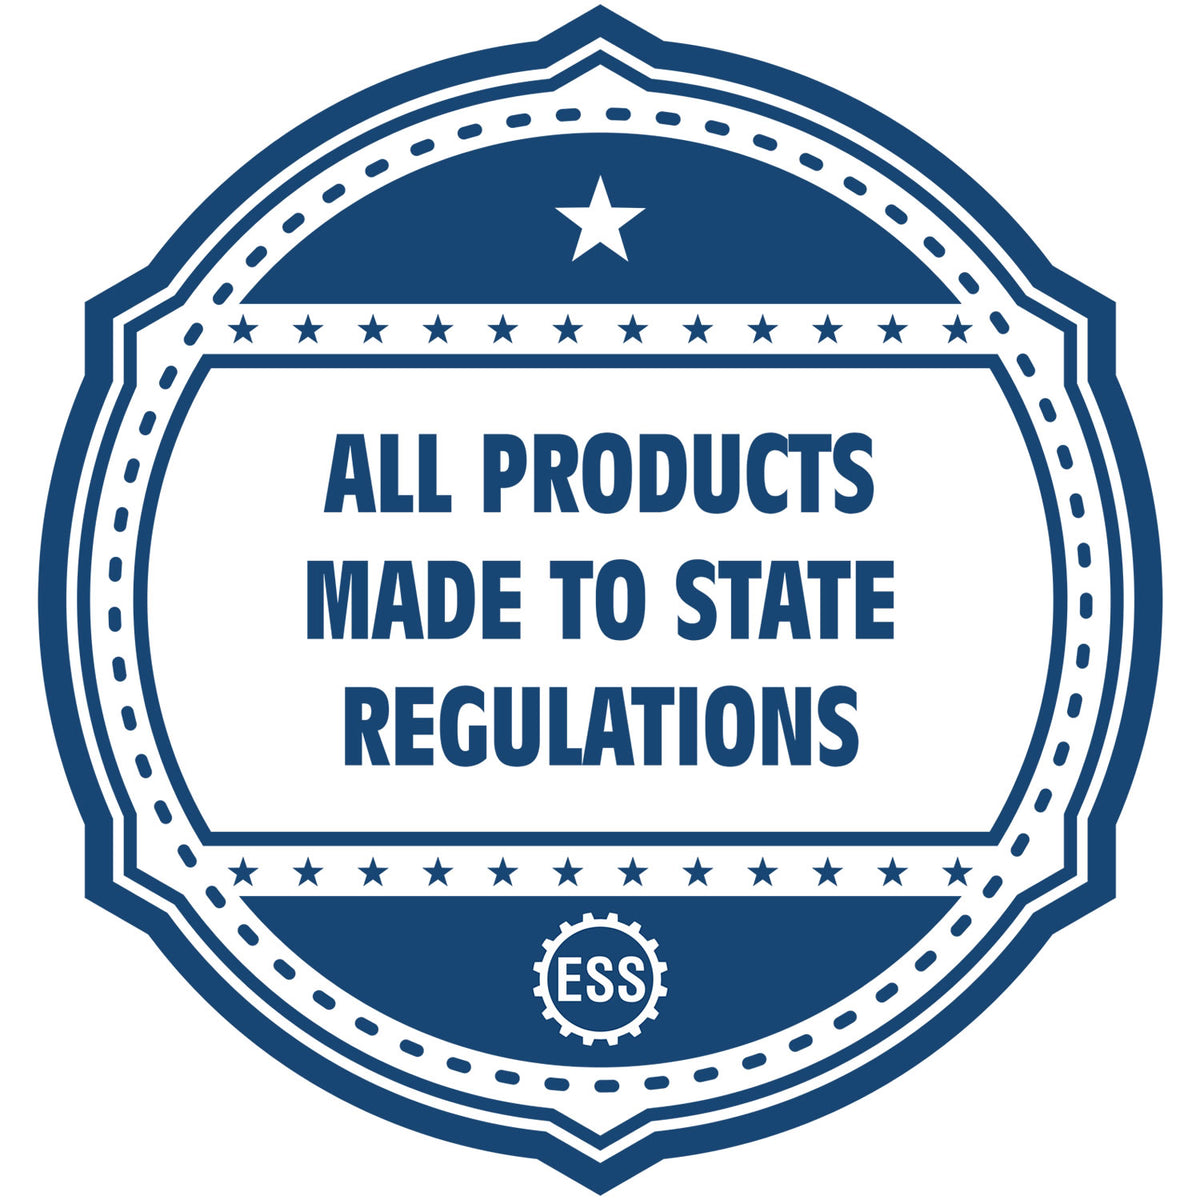 An icon or badge element for the State of Georgia Architectural Seal Embosser showing that this product is made in compliance with state regulations.